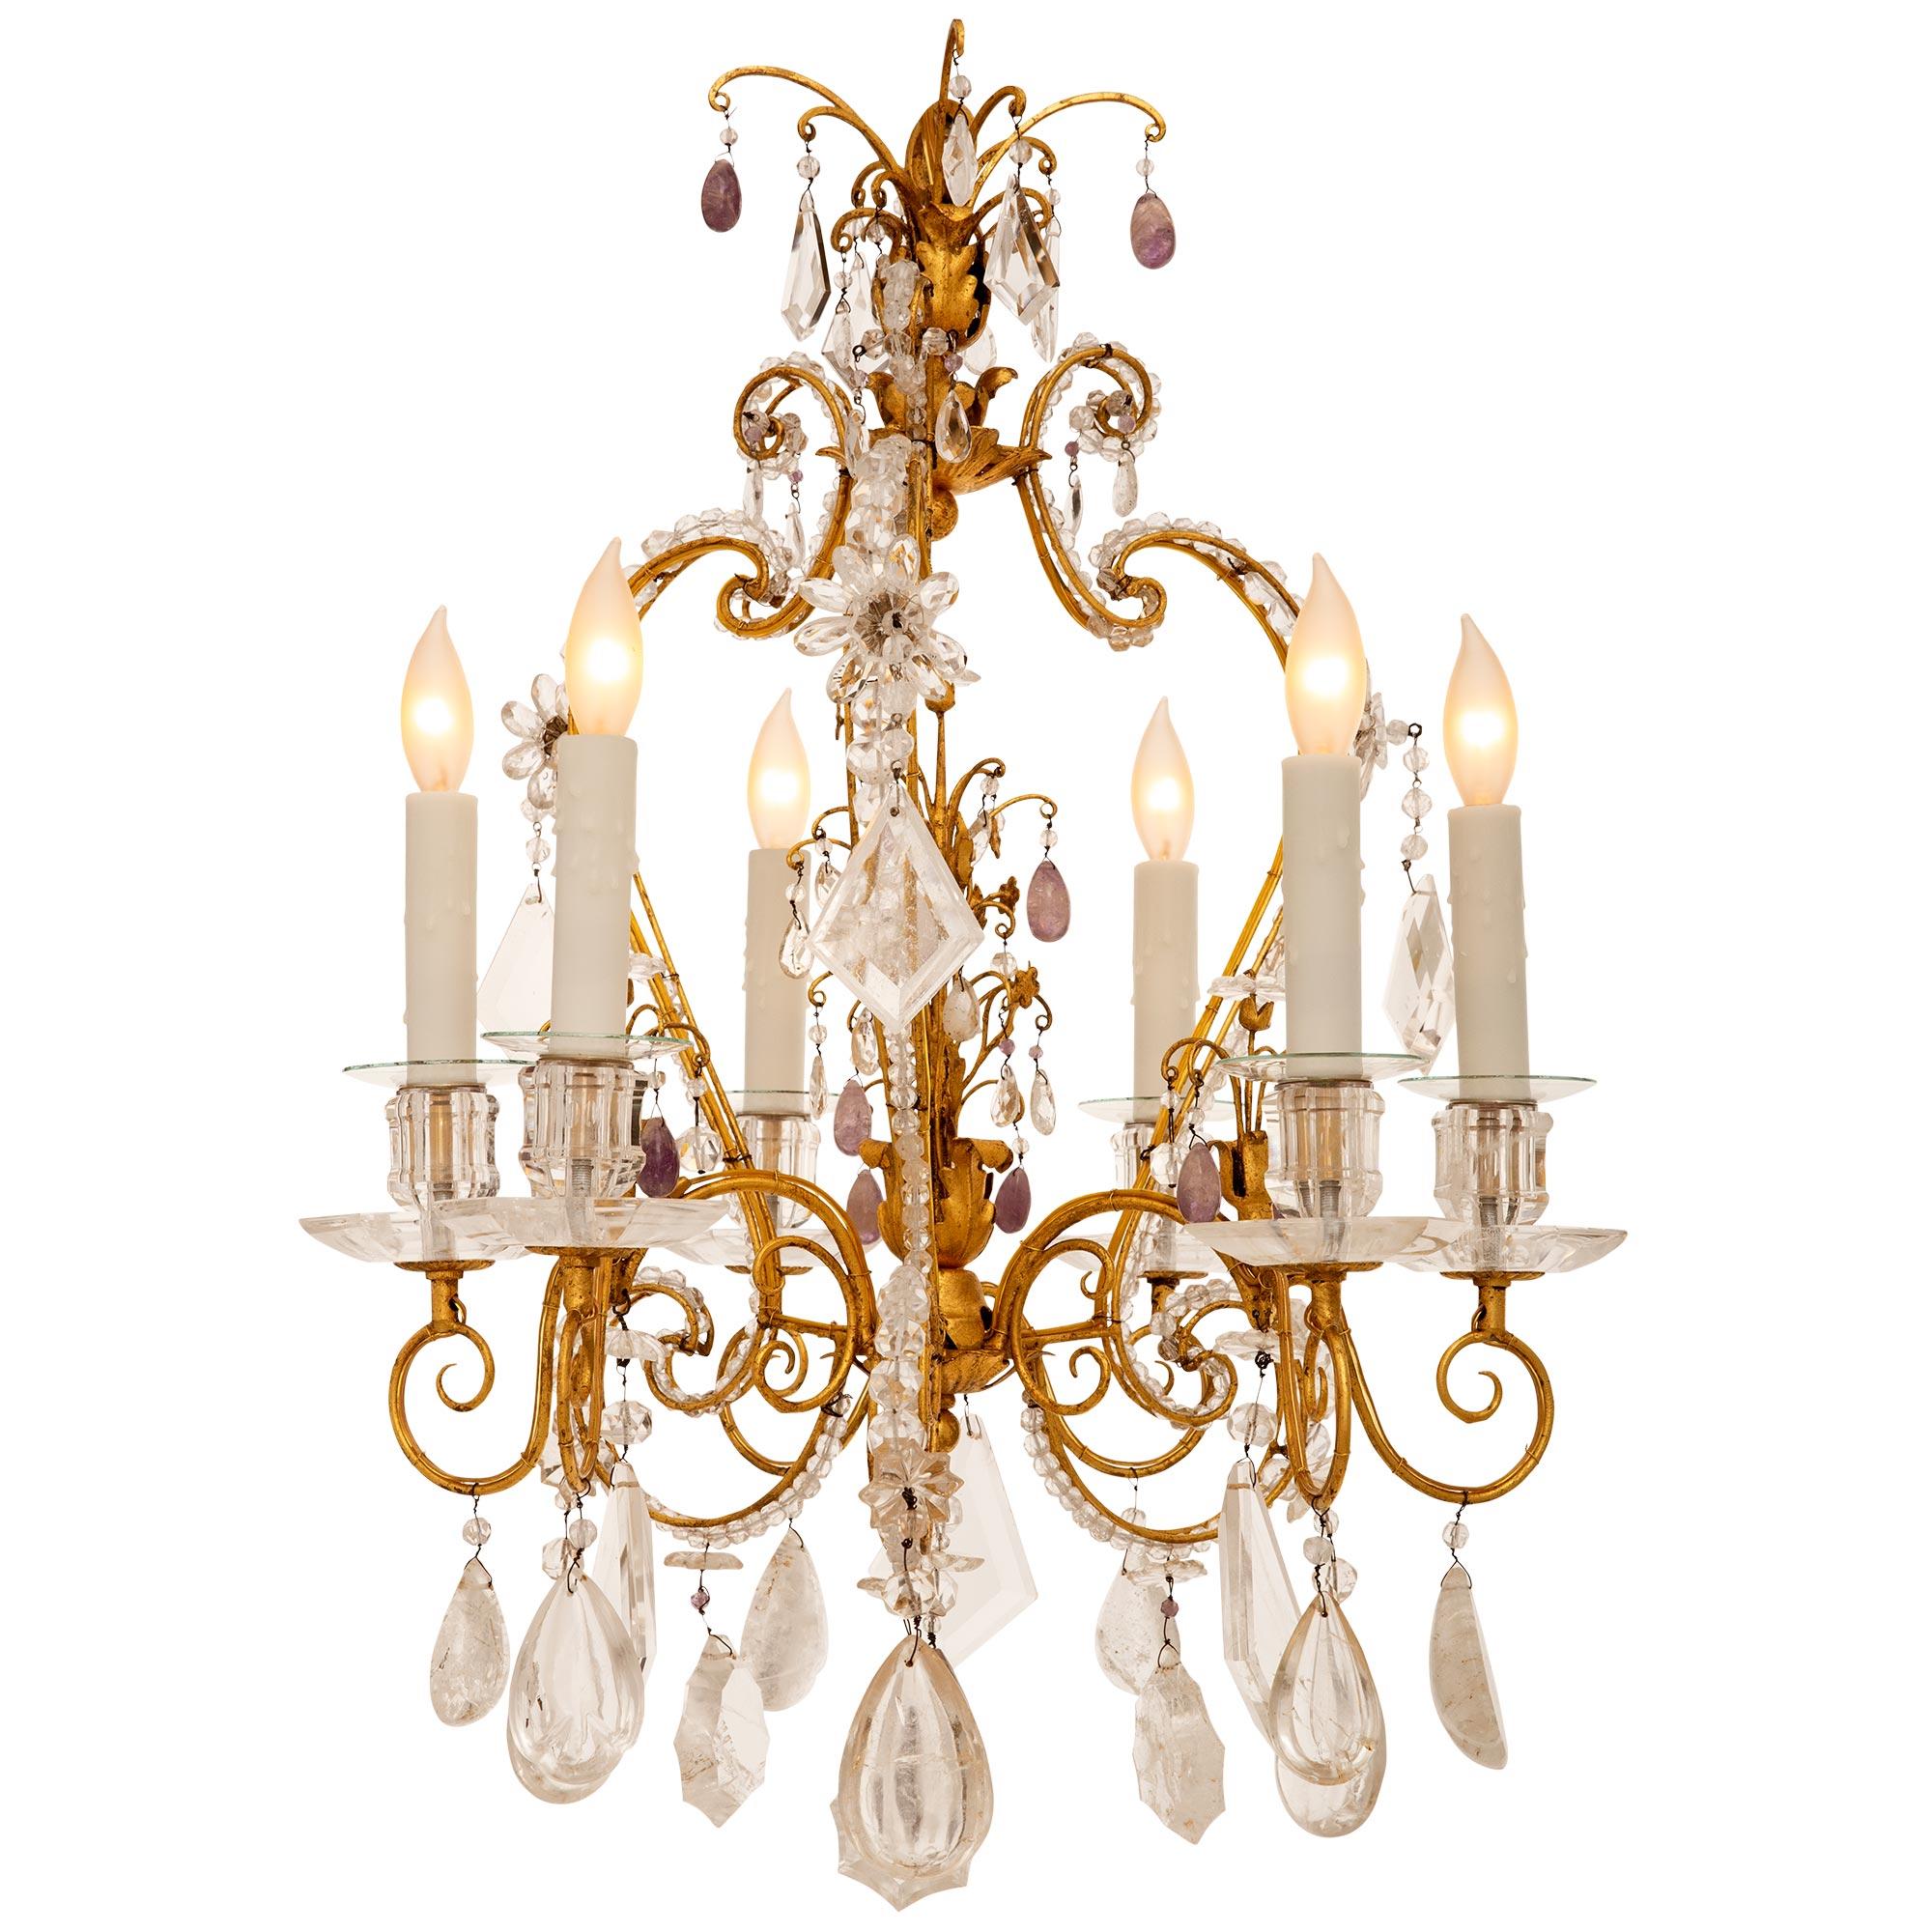 French 19th Century Louis XVI St. Gilt Iron And Rock Crystal Chandelier In Good Condition For Sale In West Palm Beach, FL